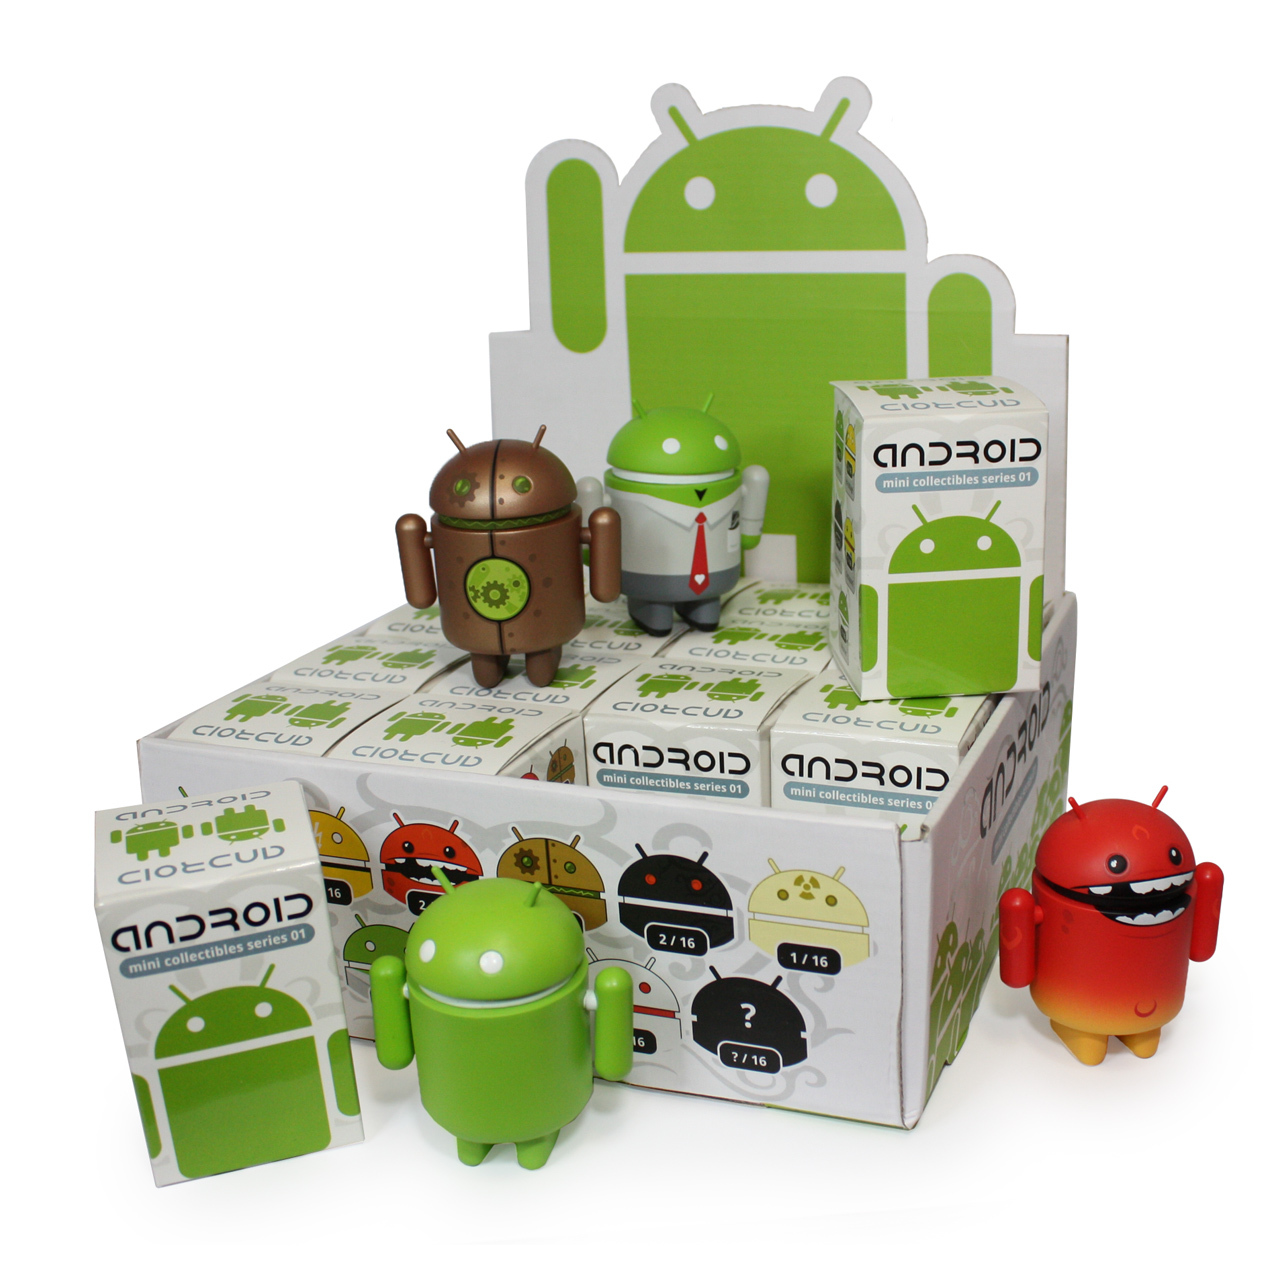 Android Mini Collectibles - Series 01